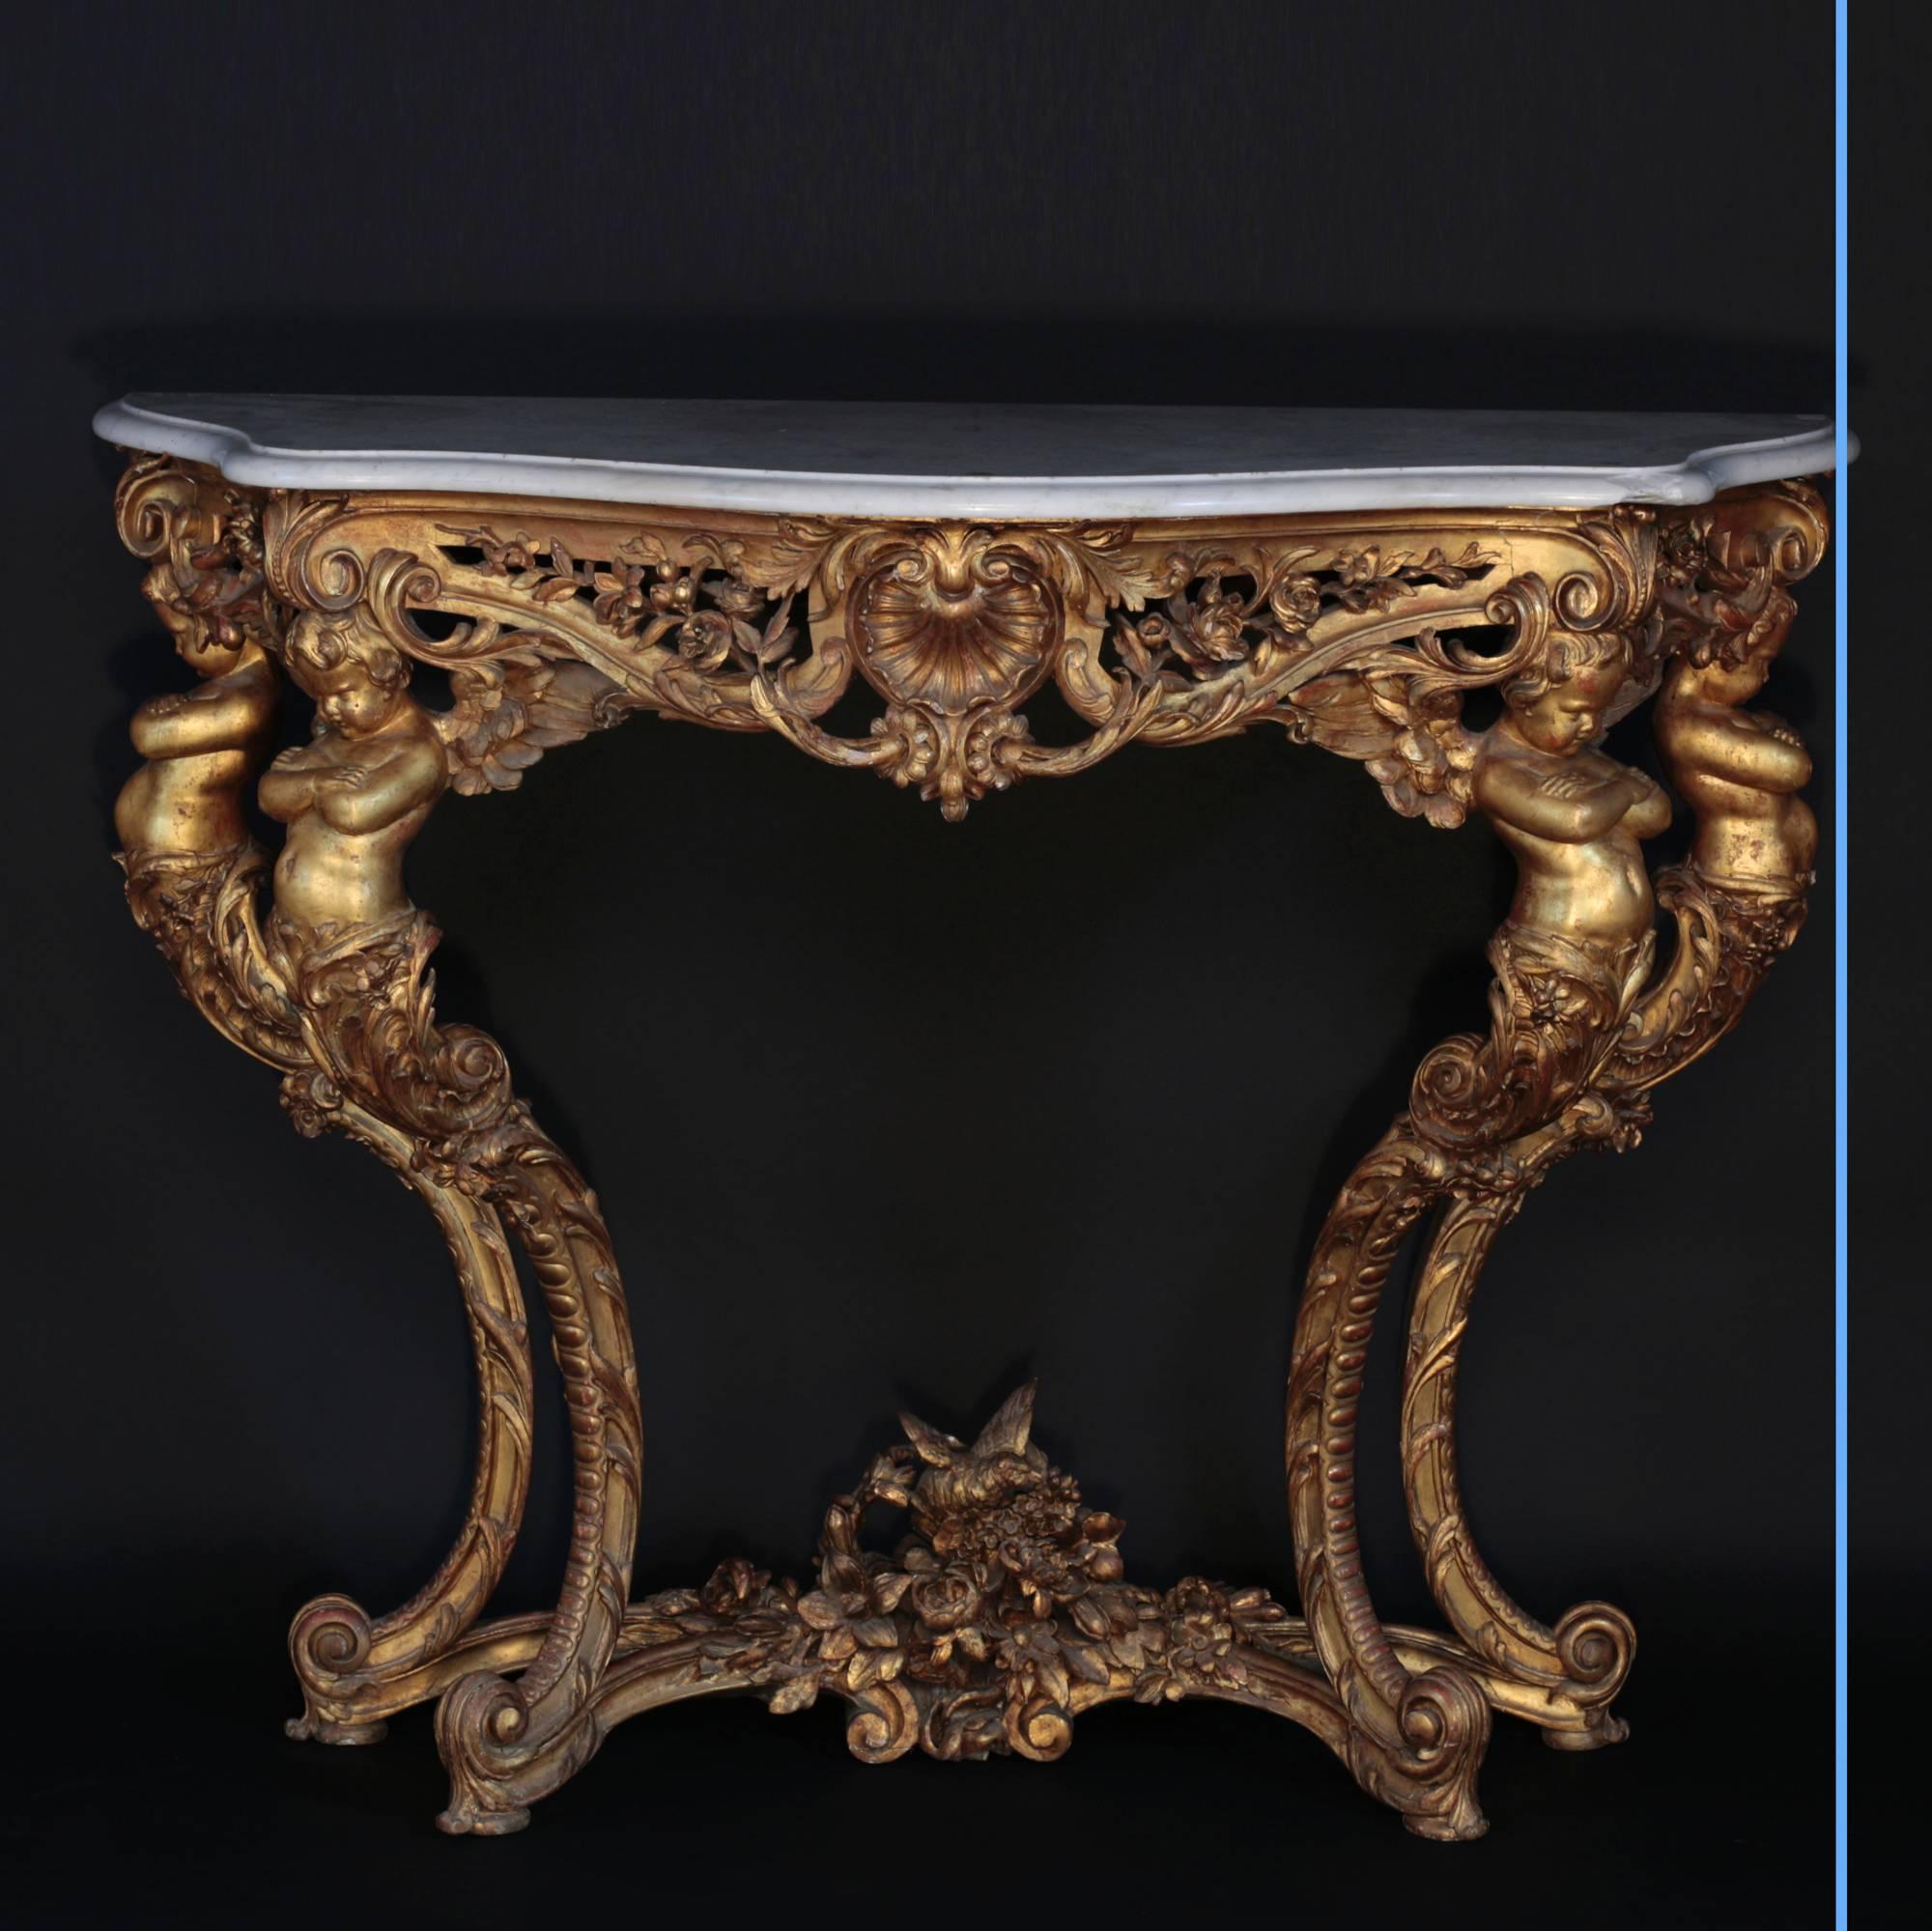 Elegant wall console table with putti.
Carrara white top marble, carved and gilt oak,
19th century,
circa 1880.
Measures:
H 102.5 – L 128 – D 54 cm.